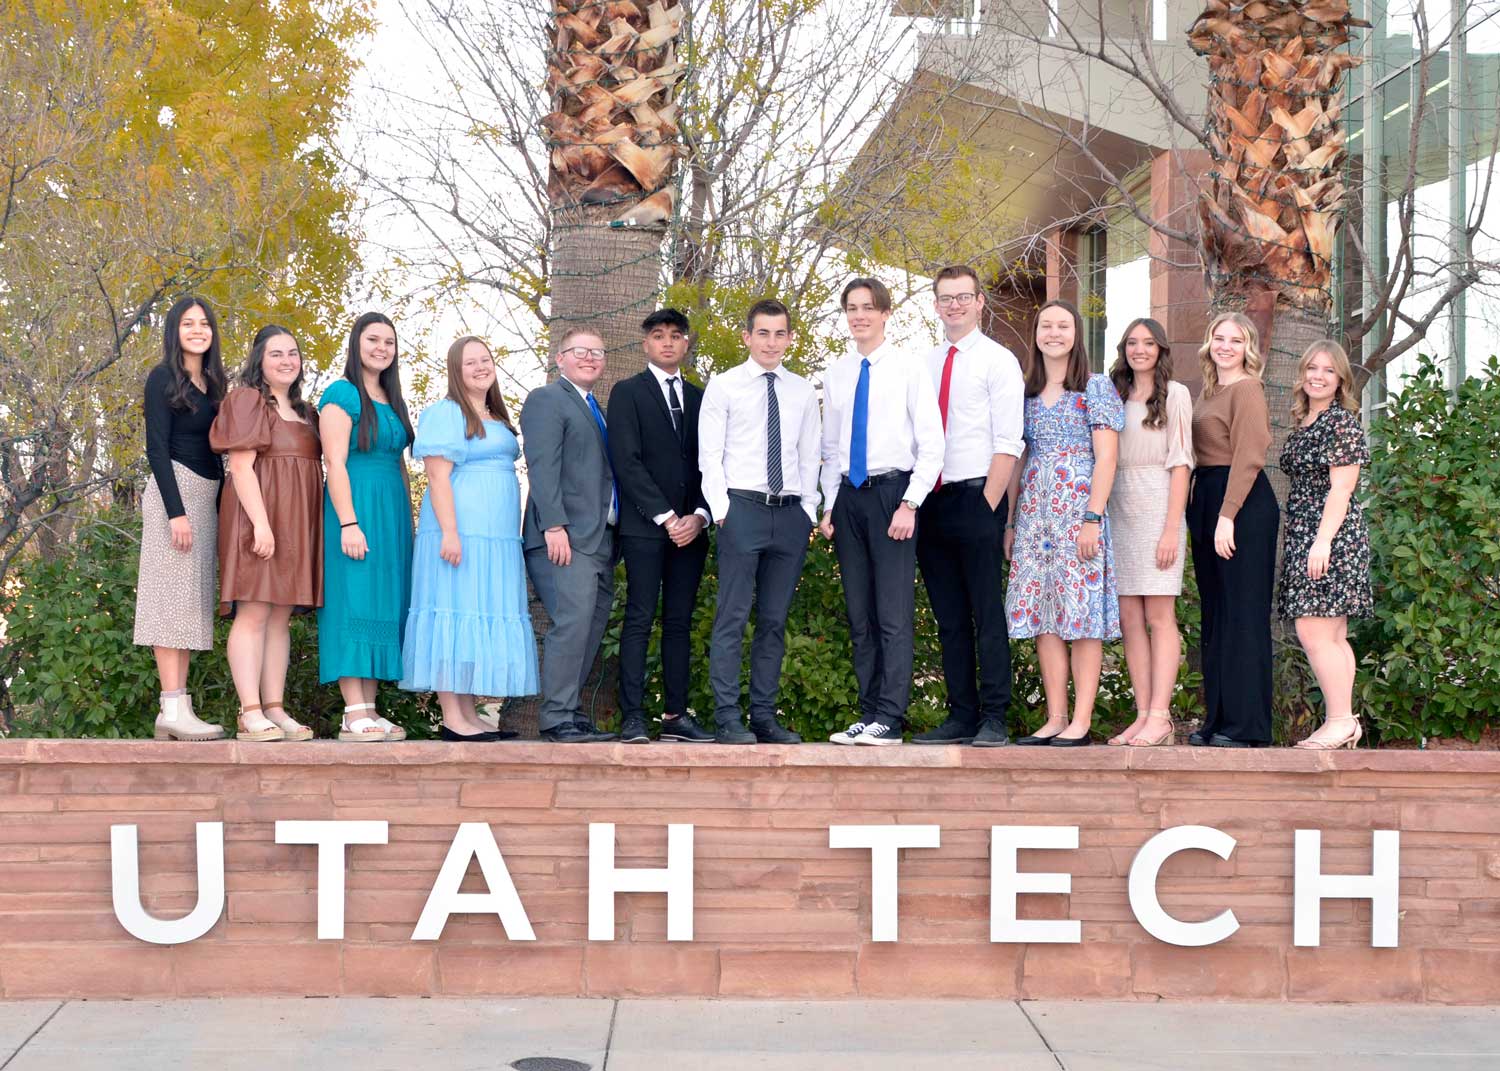 Sterling Scholar students on the fence that says UTAH TECH.